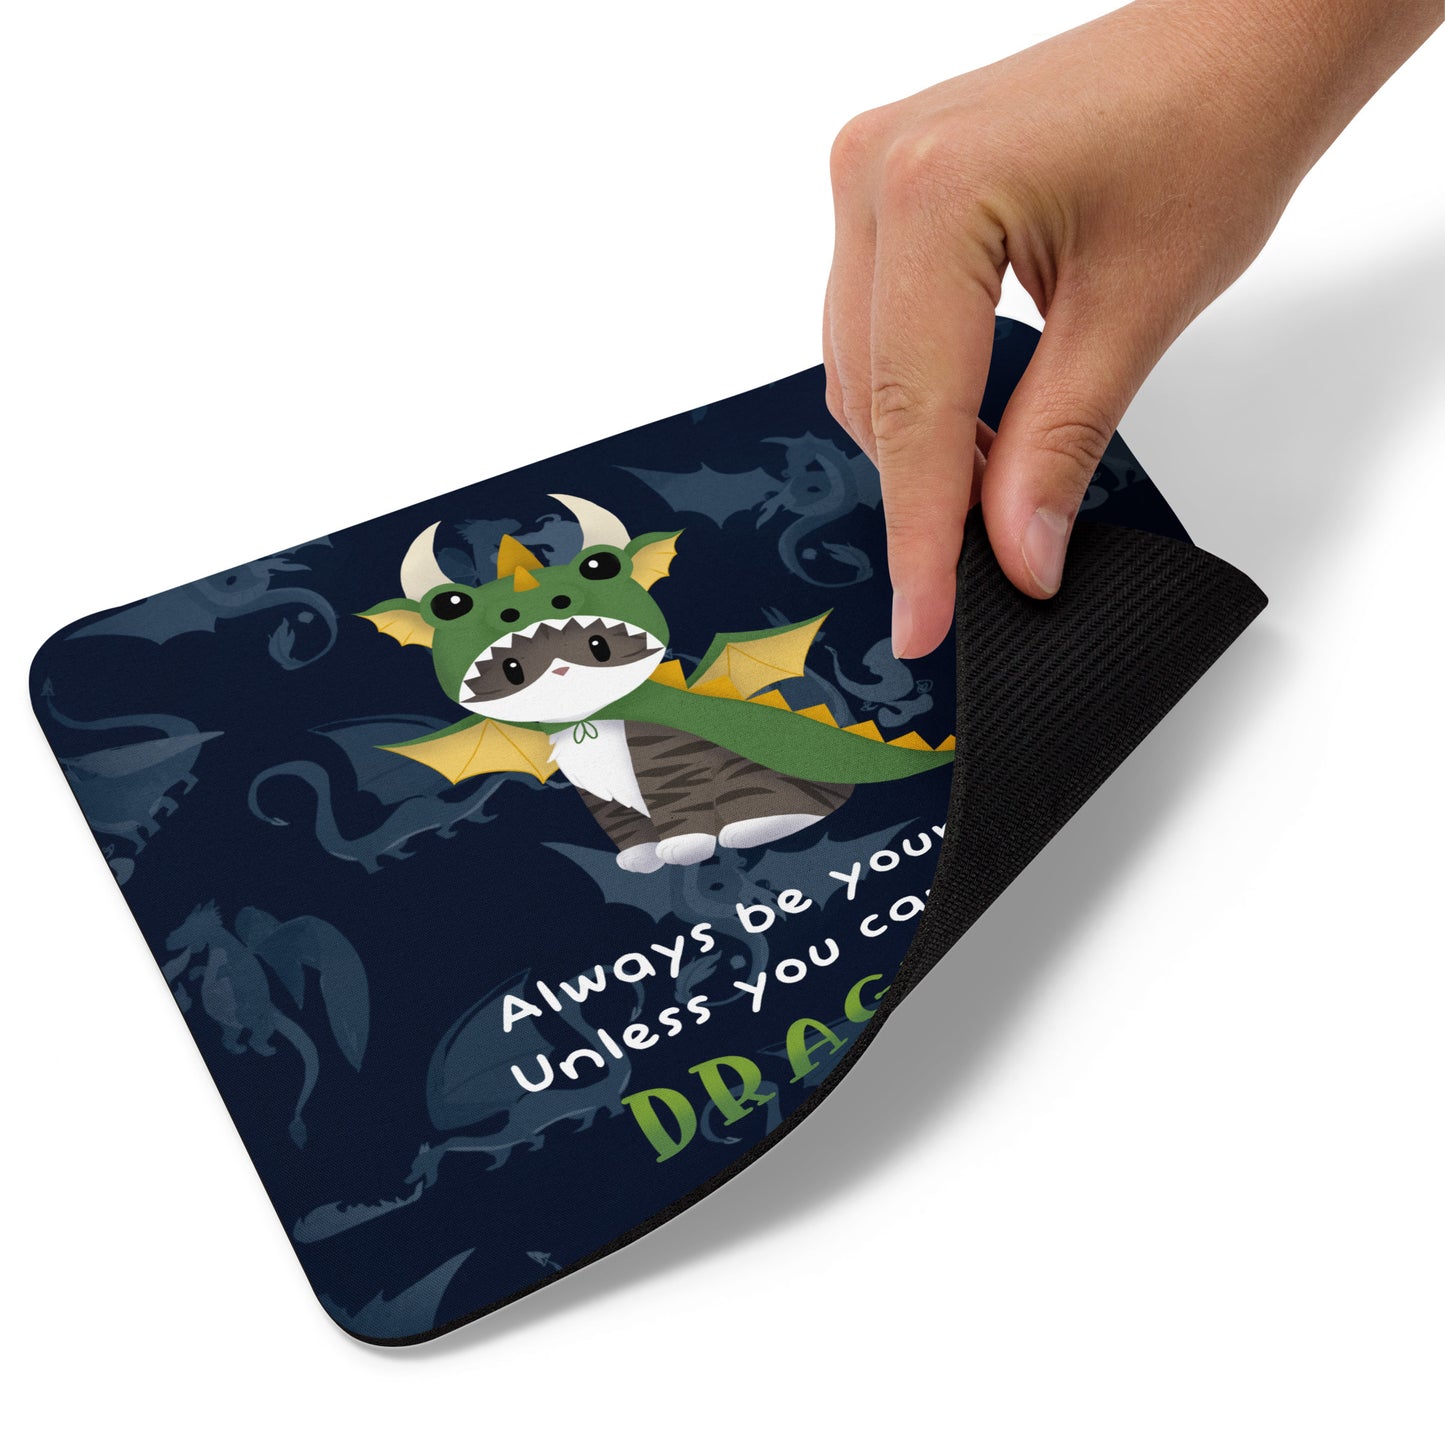 Jack the Dragon Kitty Mouse Pad